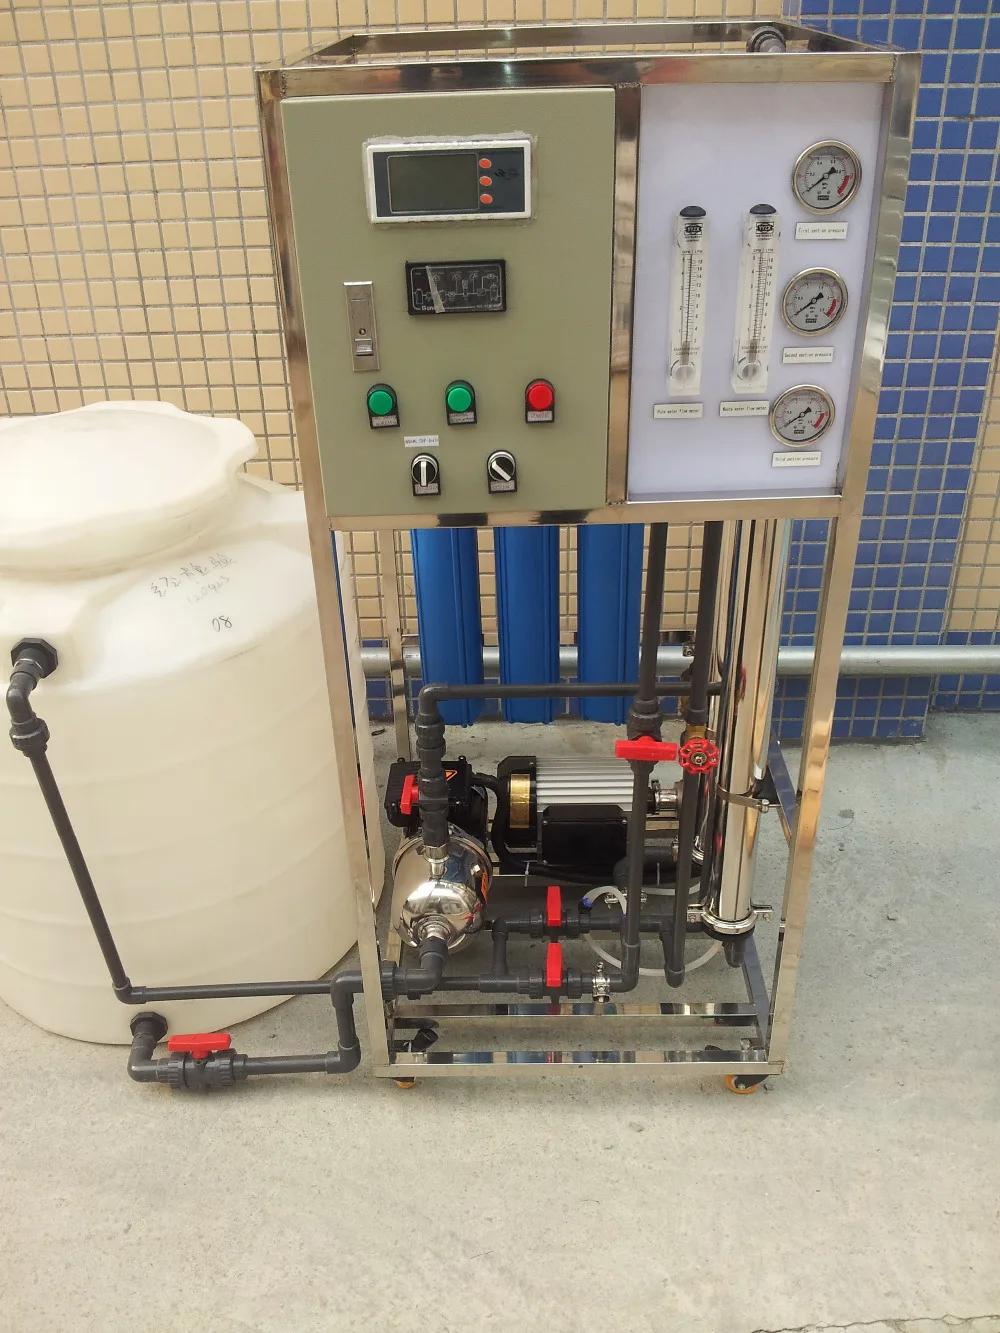 water ro purifier/ water filter purifier machine cost for commercial